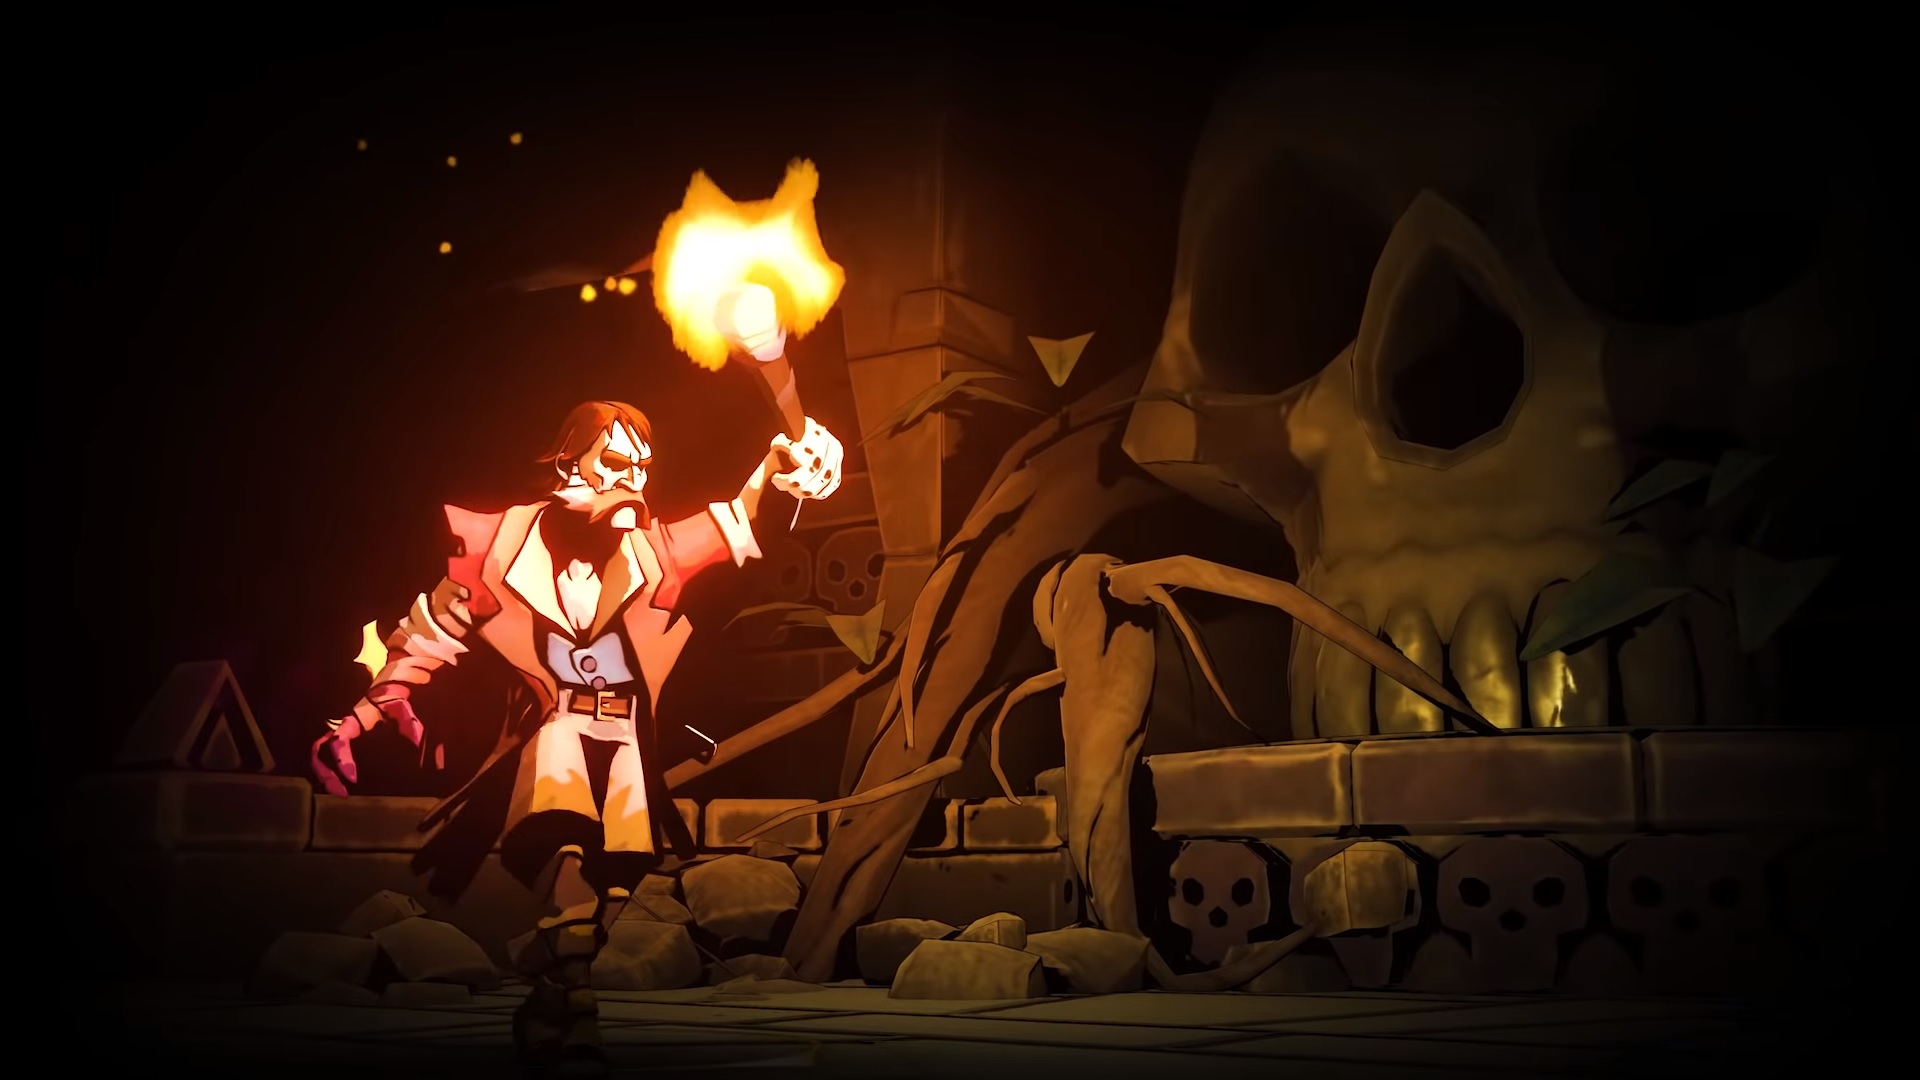 download the last version for apple Curse of the Dead Gods